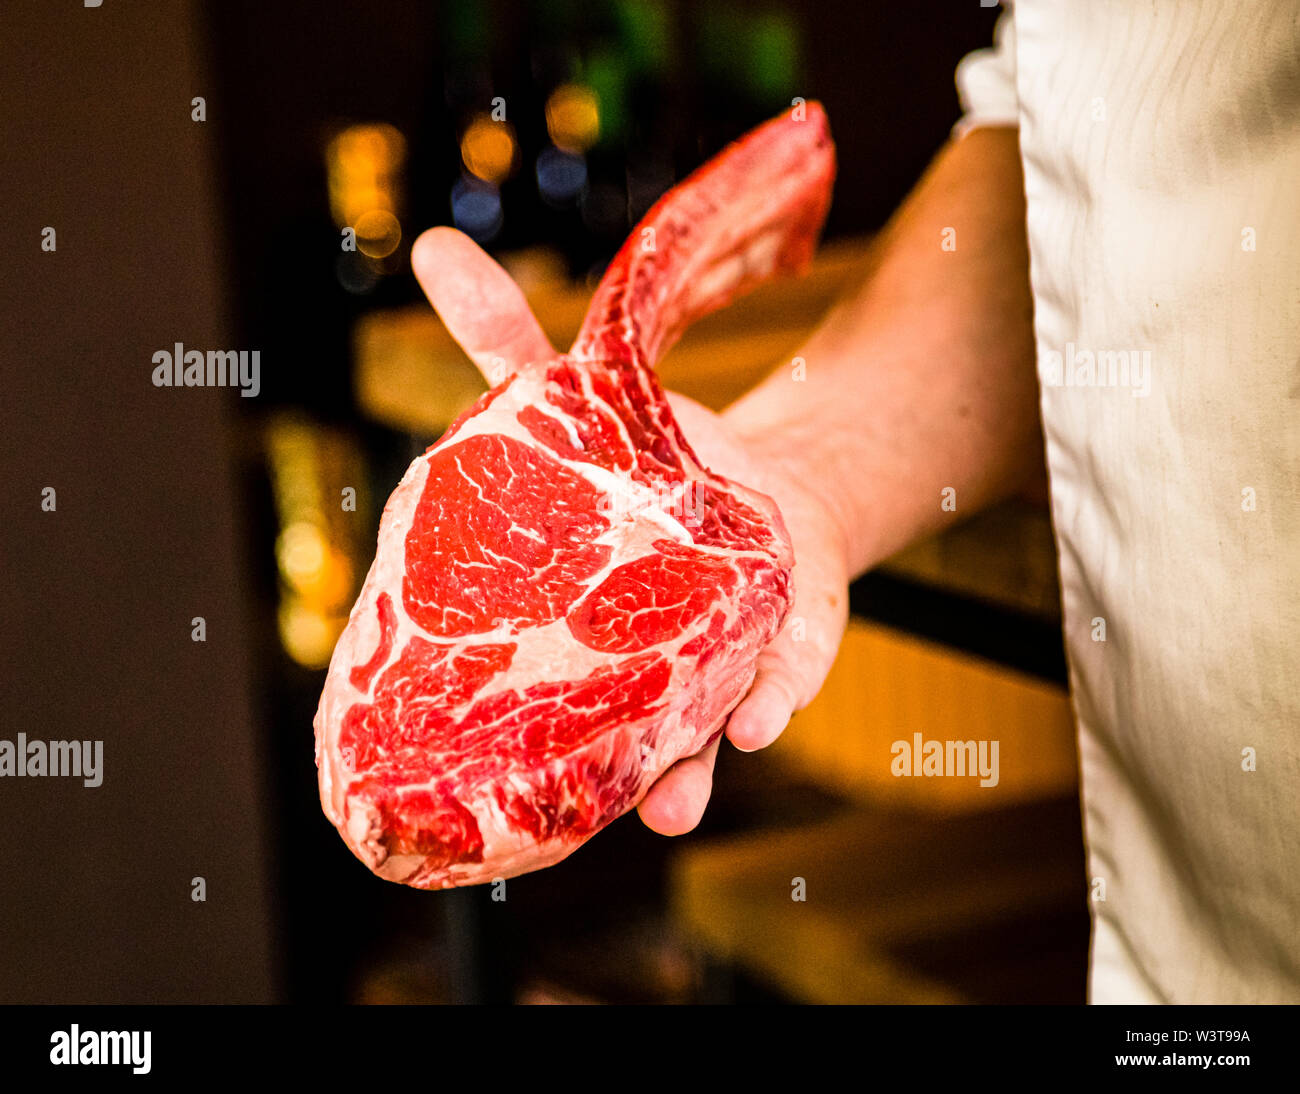 Tomahawk steak in Bad Kissingen, Germany. Irish Tomahawk, Dry Aged weighs around one kilo depending on the cut. The masculine steak for connoisseurs can also be shared by 2 - 3 people. Stock Photo